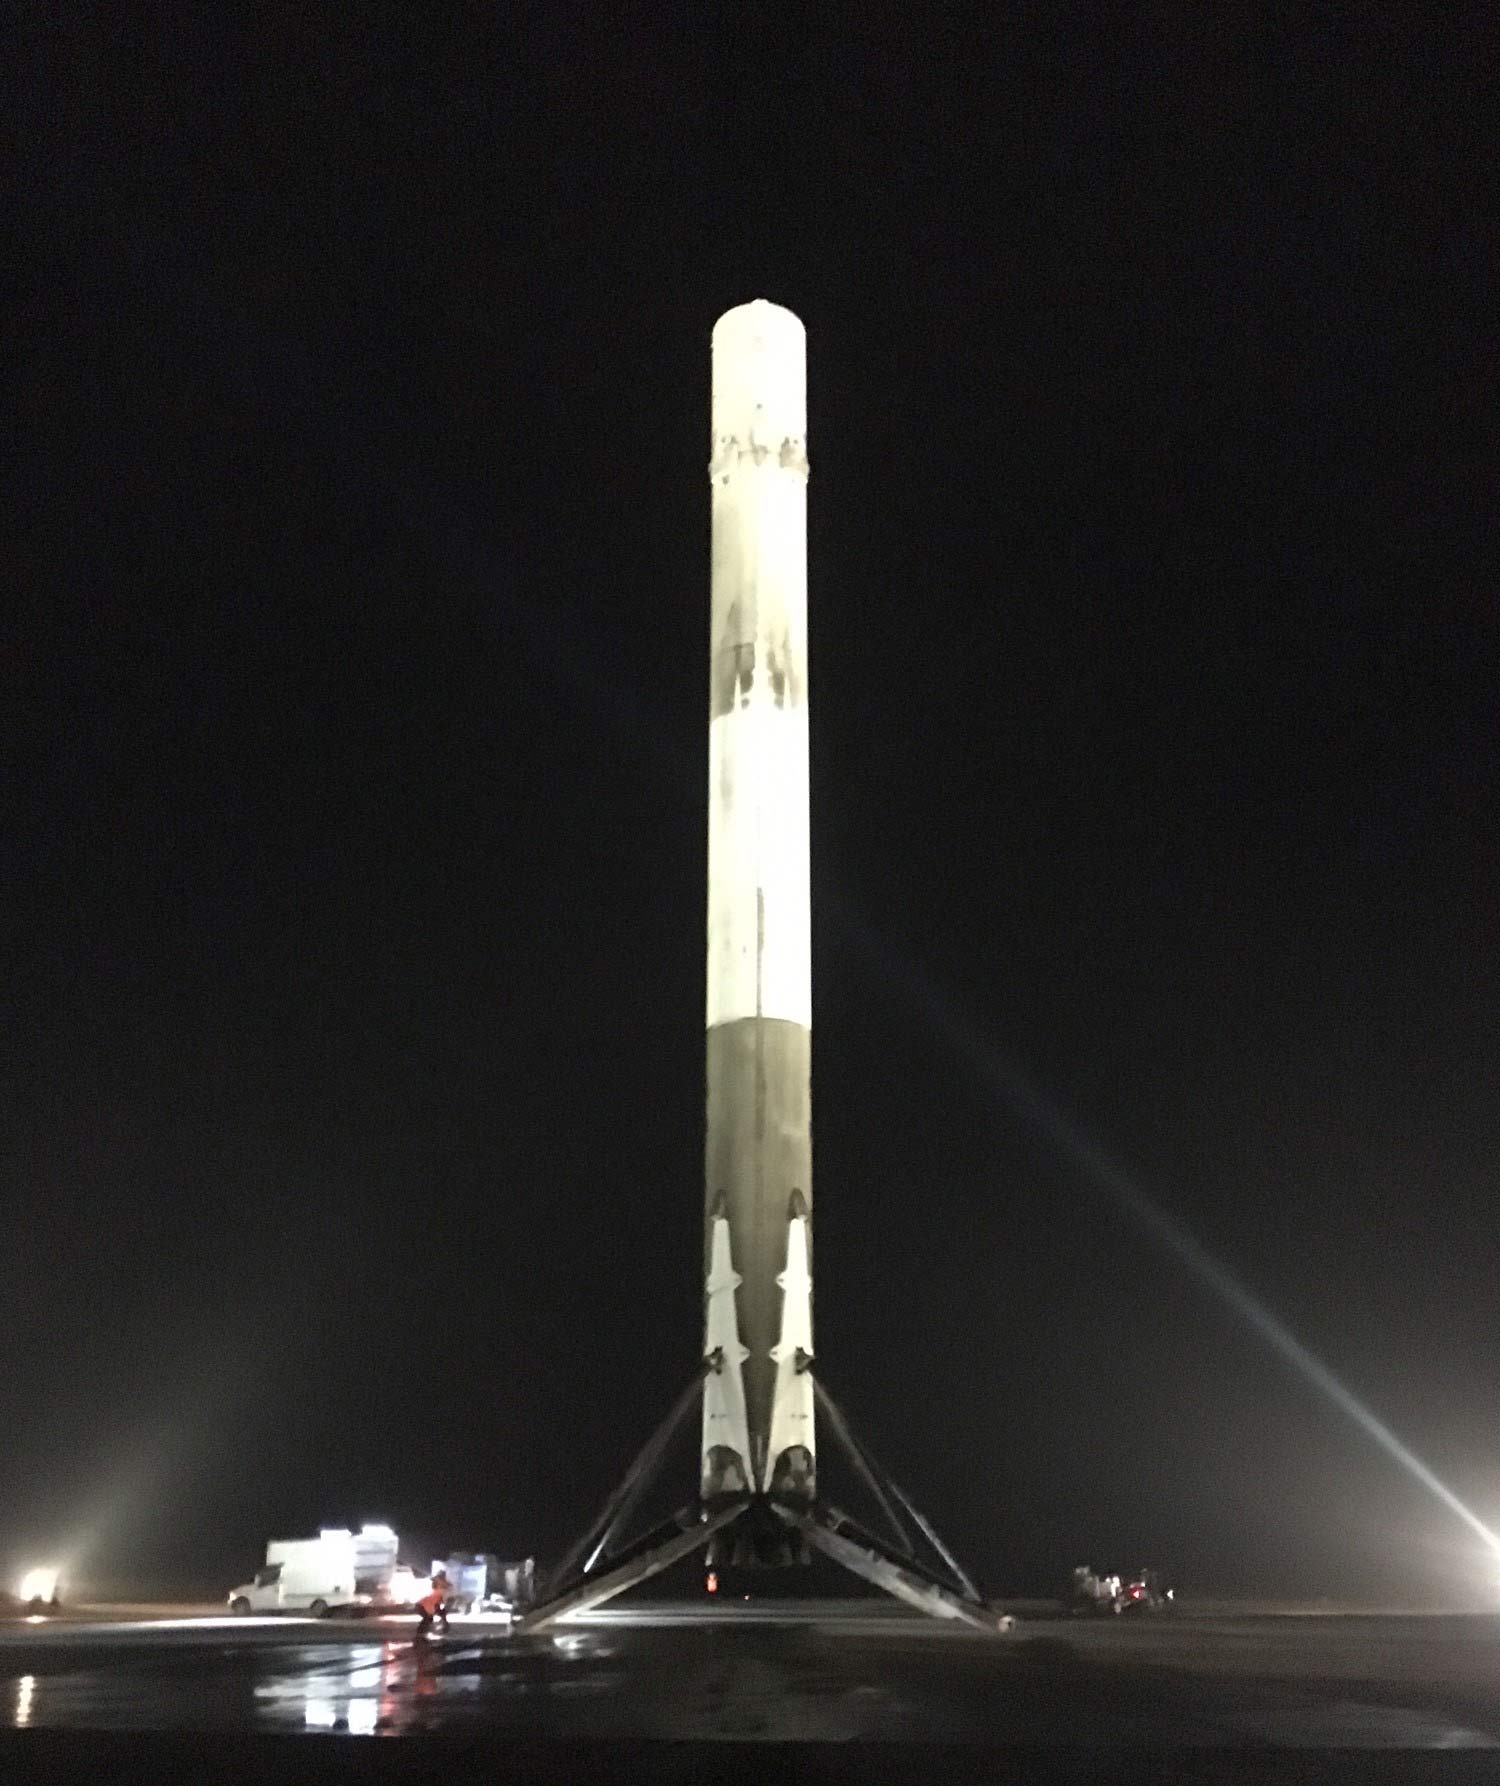 Gallery of SpaceX photo of the December 2015 Falcon 9 rocket landing